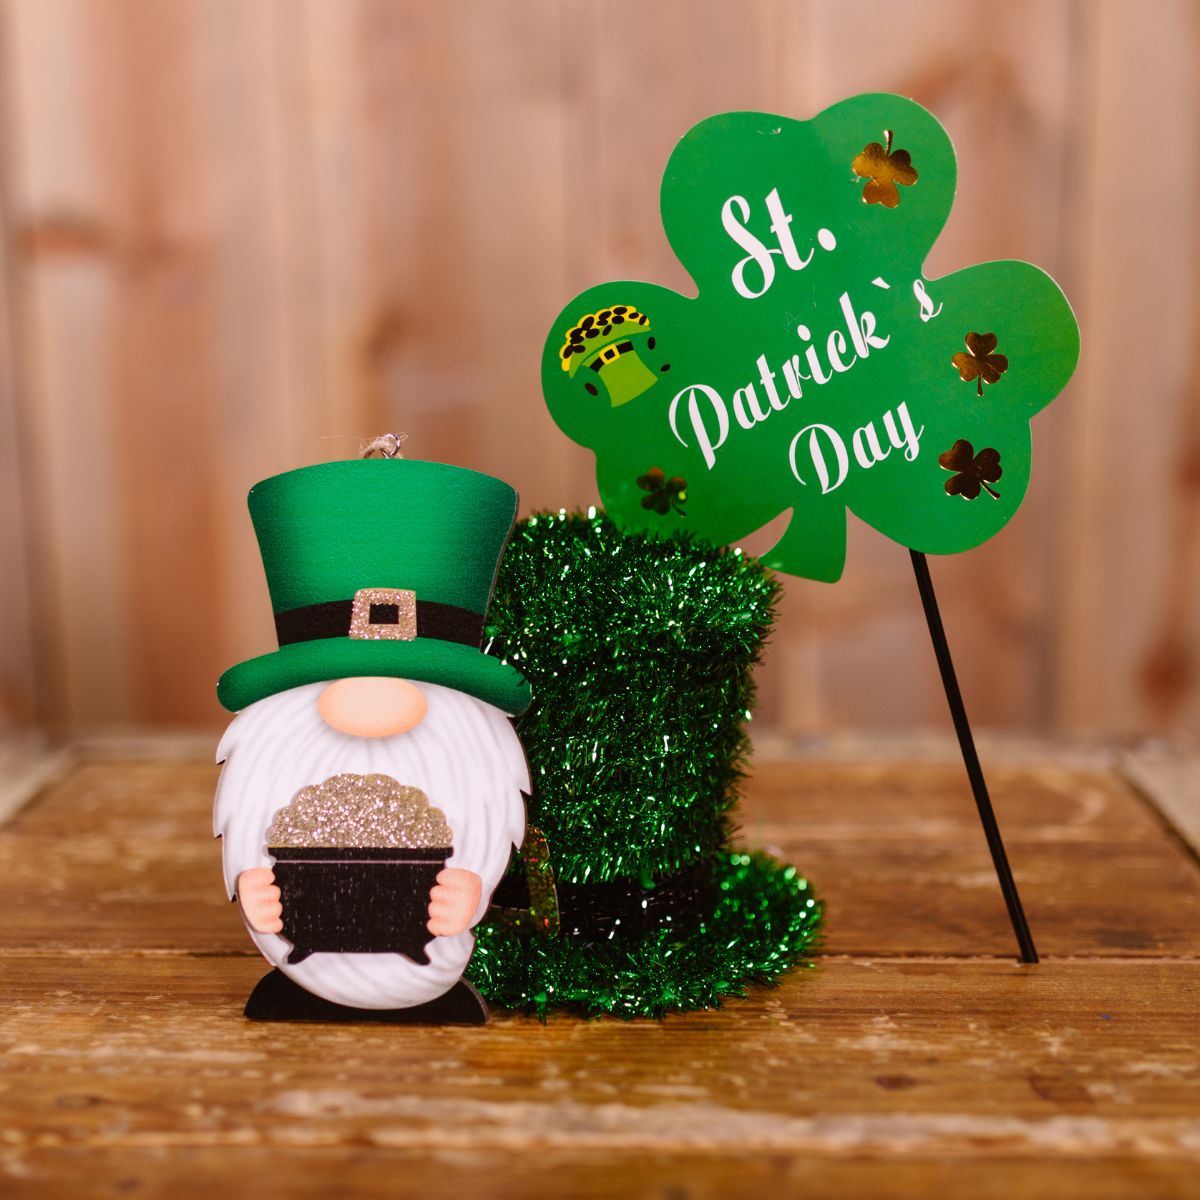 🏡 Happy #StPatricksDay! 🏡🍀

Celebrate this festive occasion by shining a spotlight on an exciting investment opportunity:  #noteinvesting! 📈 While the luck of the Irish may be with you today, smart investments in notes ensure a brighter financial future all year round. 🌈